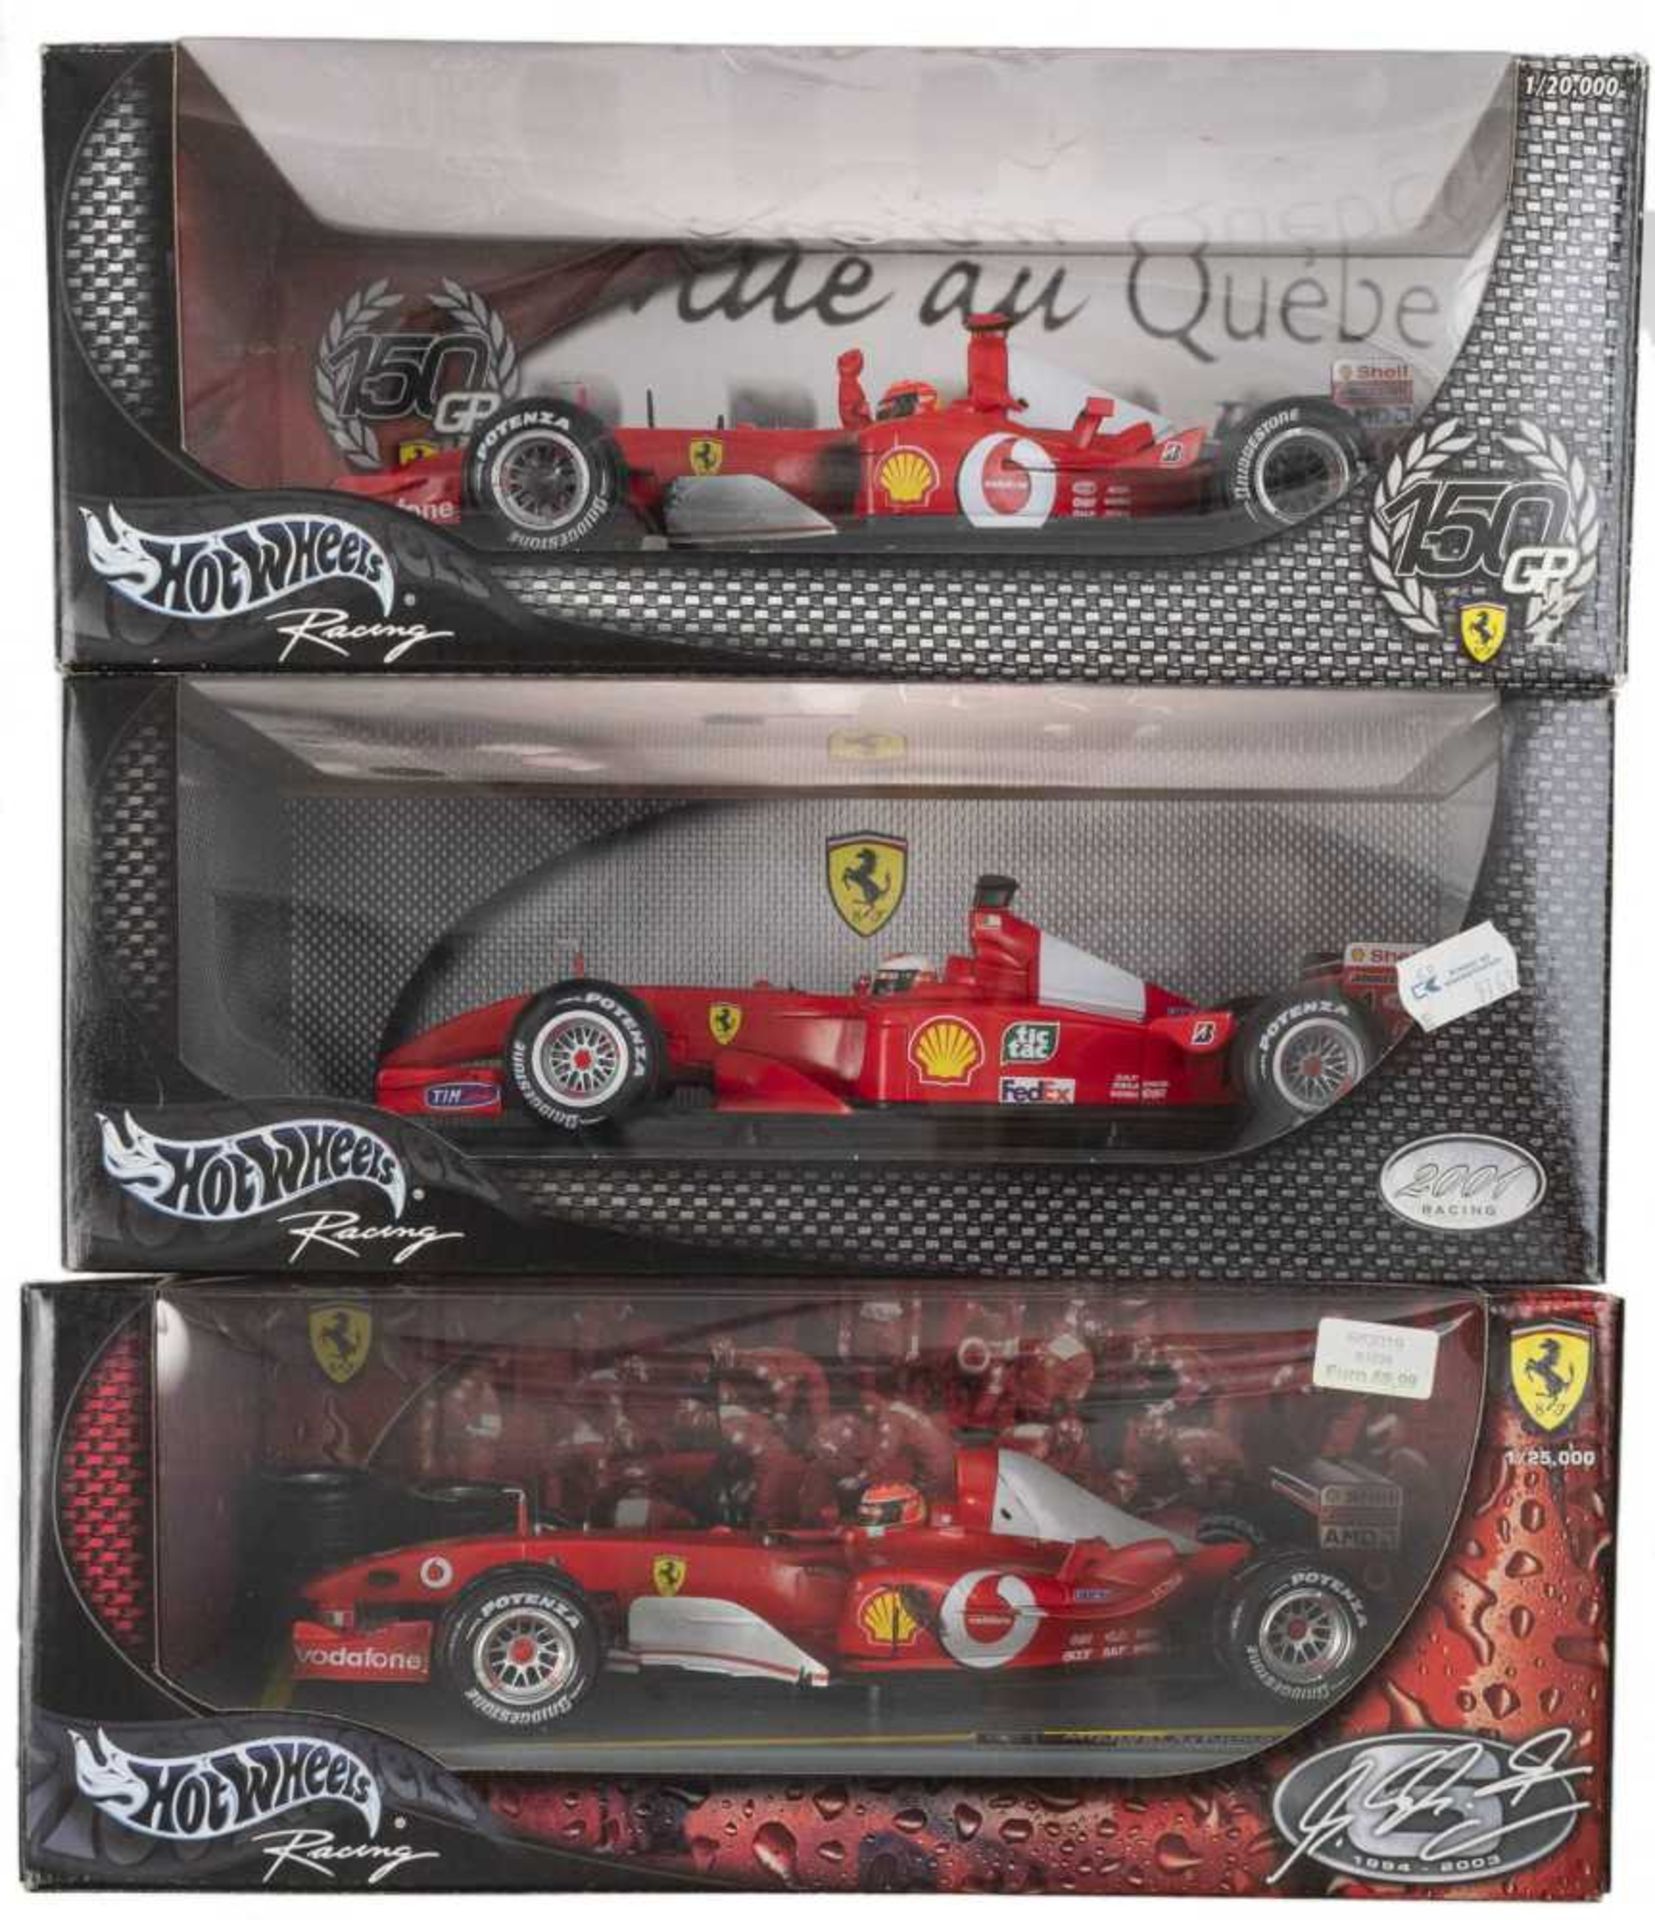 FERRARI 248 / 1, F2001 as well the limited special edition models 2003 World champion and 150 Ferrar